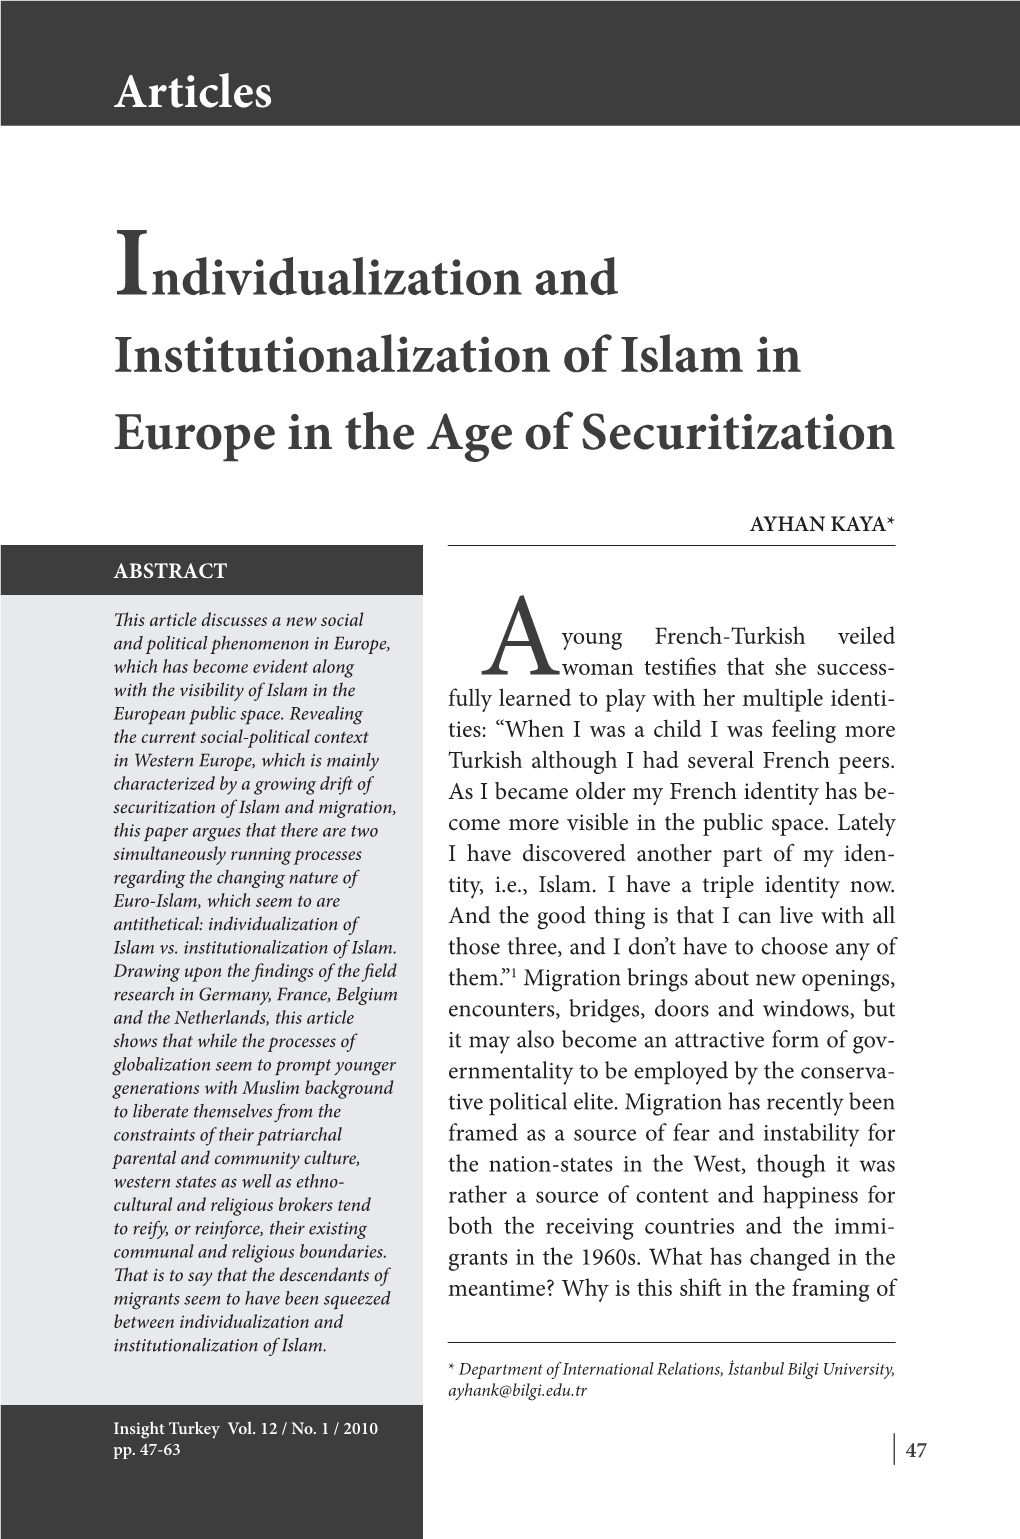 Institutionalization of Islam in Europe in the Age of Securitization